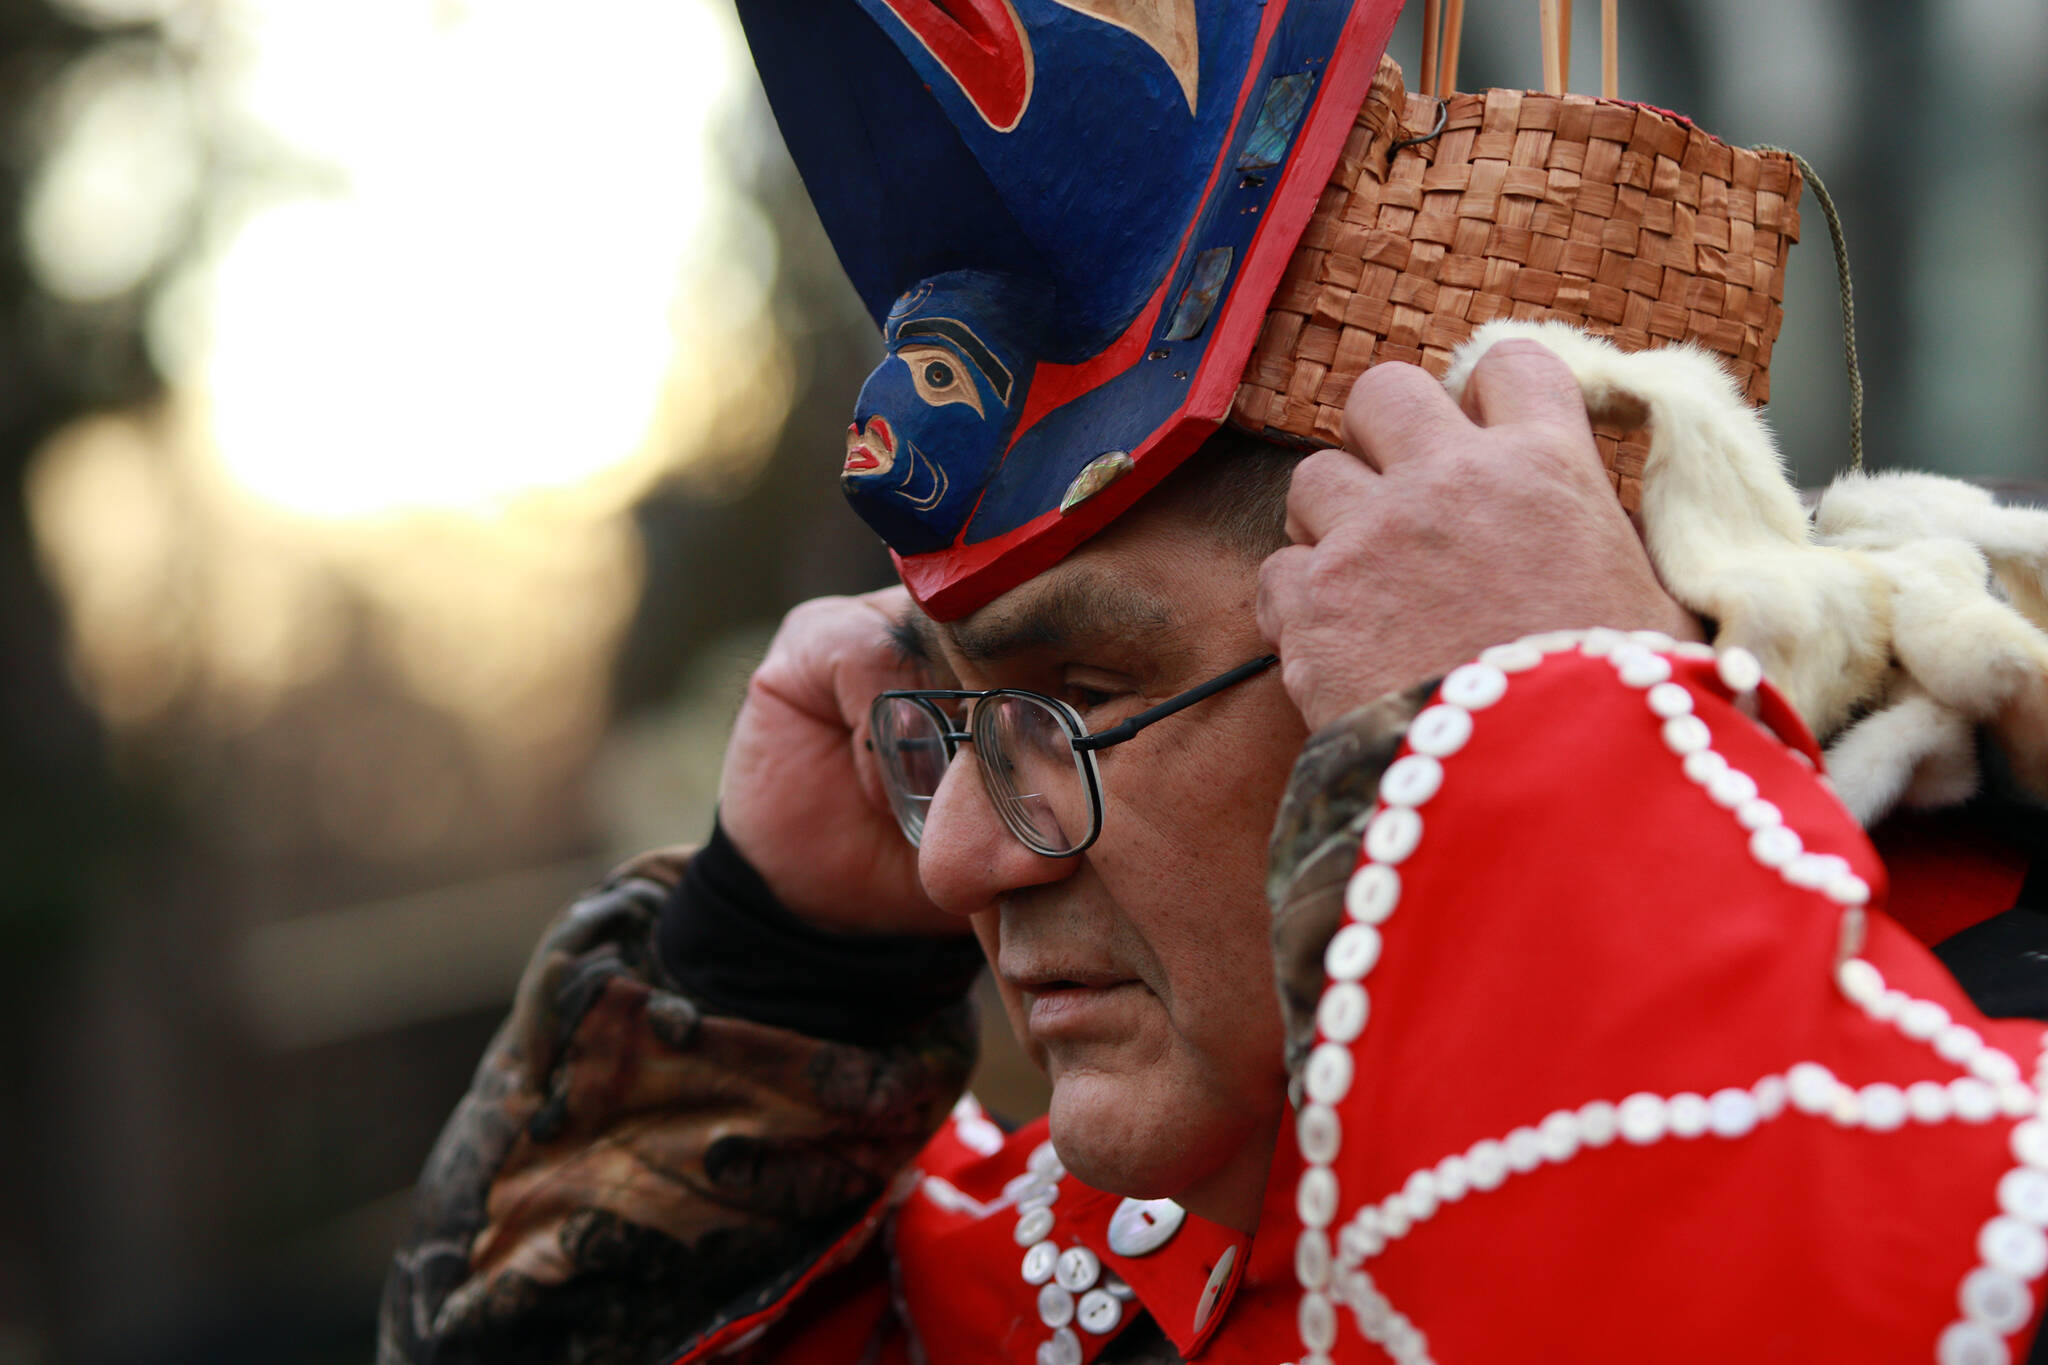 Hereditary chief Deric Snow adjusts his glasses as he joins family and friends to witness the historical repatriation of the Nuxalk Nation totem pole carved by the late Louie Snow after years of effort to release the pole back to the nation from the Royal BC Museum during a ceremony in Victoria, B.C., on Monday, February 13, 2023. THE CANADIAN PRESS/Chad Hipolito